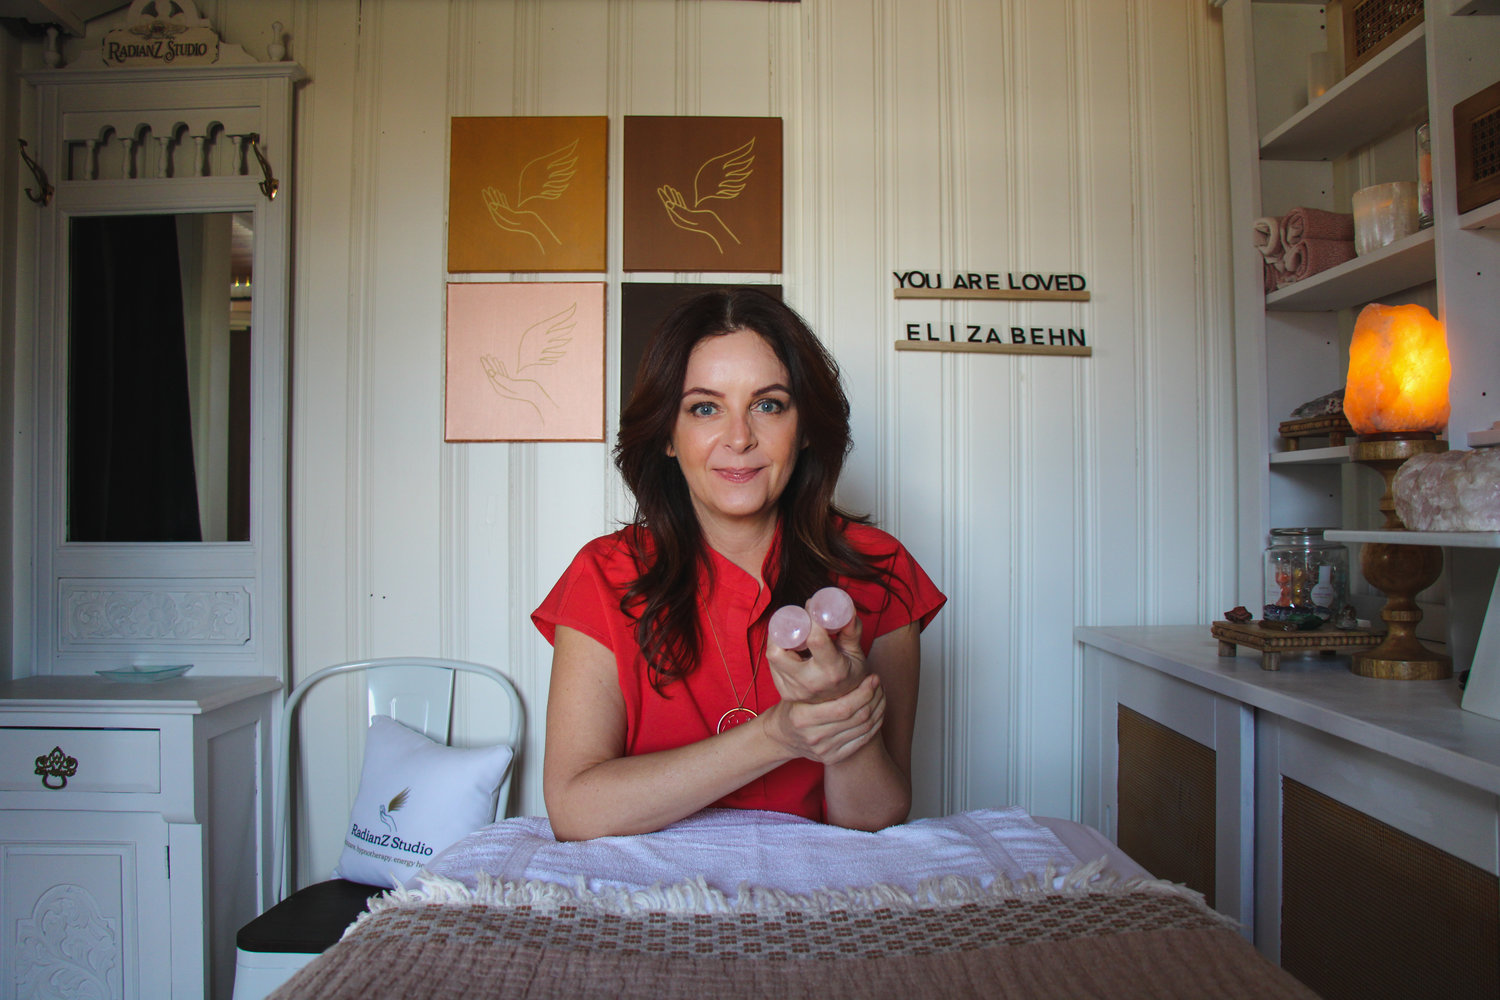 Aesthetician Franziska Bernhard, a former ballerina and model, opened her beauty studio, RadianZ, in West Sayville’s historic Green House. Taking a personalized and artistic approach to skincare and facials, Bernhard has longstanding clientele.